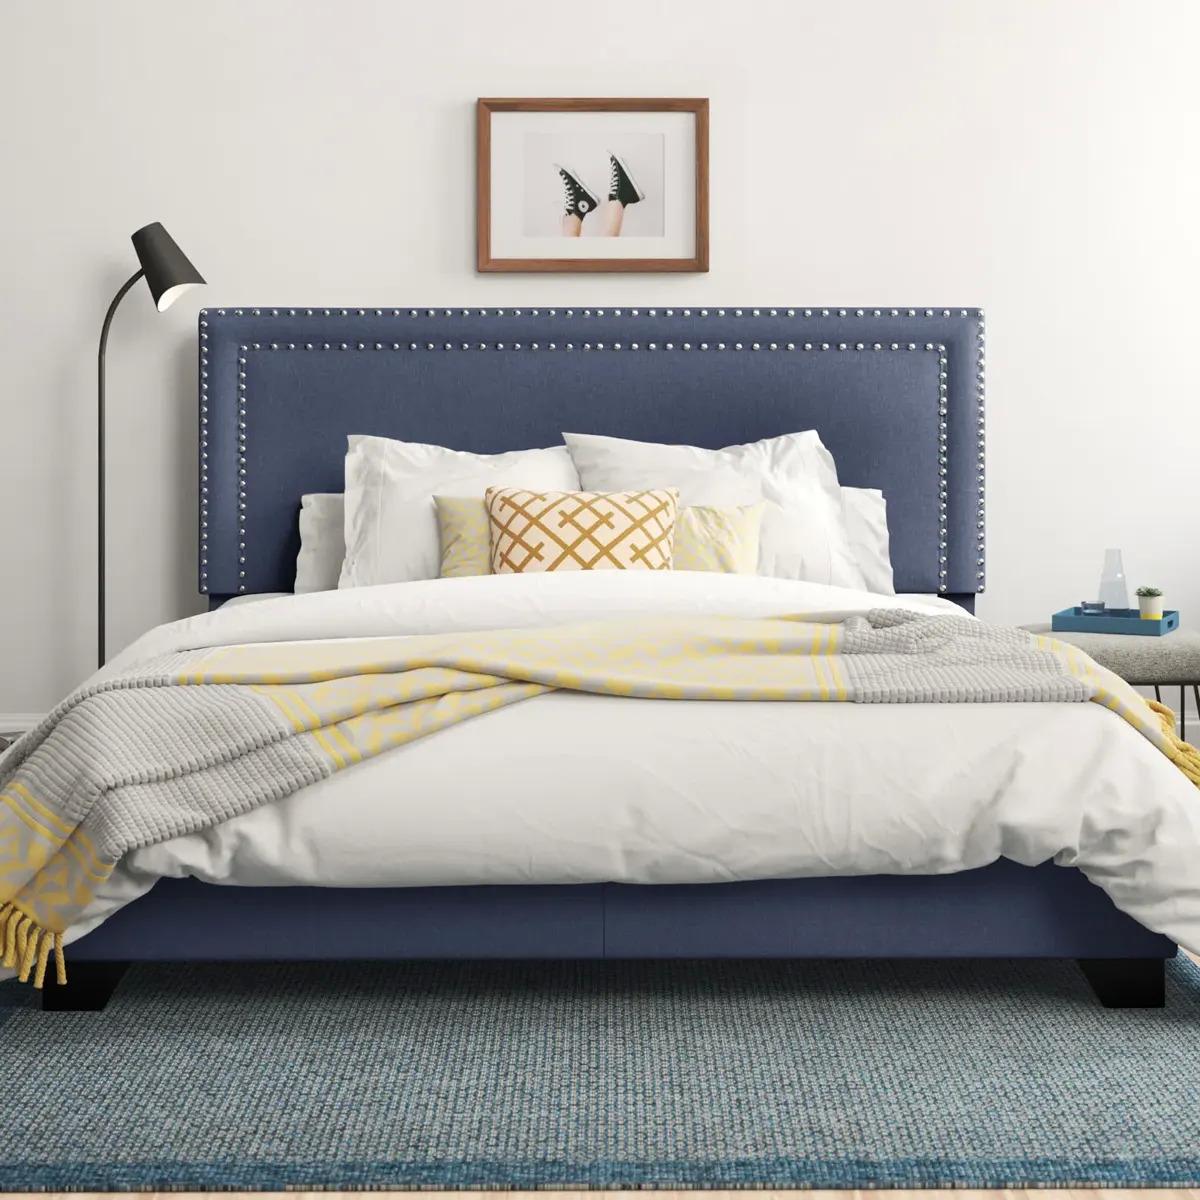 Charlie Upholstered Low Profile Standard King Size Bed for $143.49 Shipped